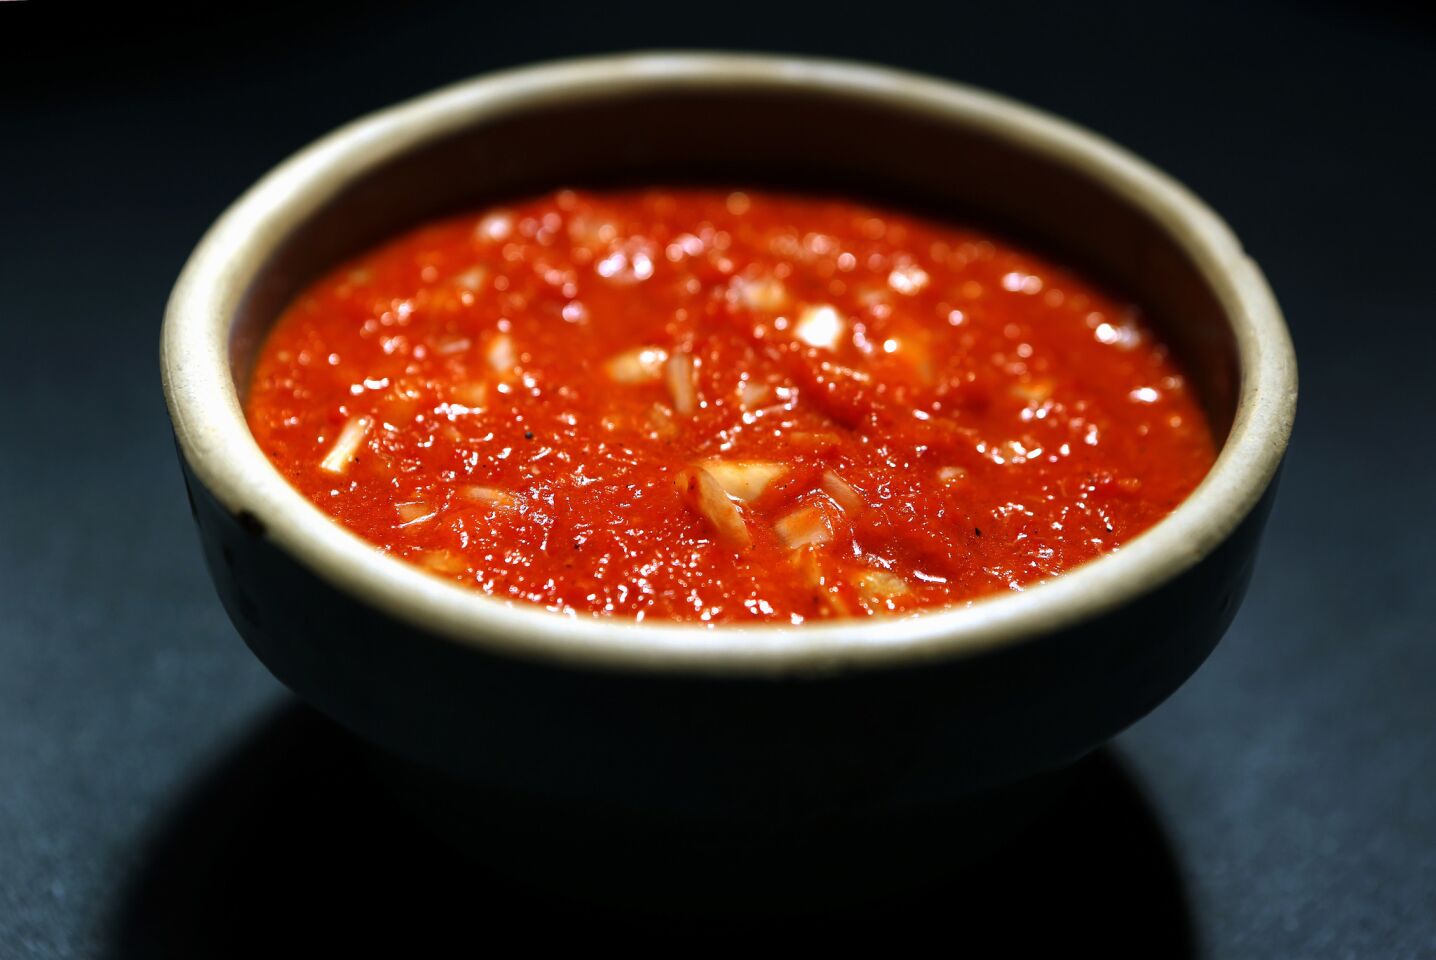 Recipe: Druze secret sauce (roasted red pepper purée with onion shards)